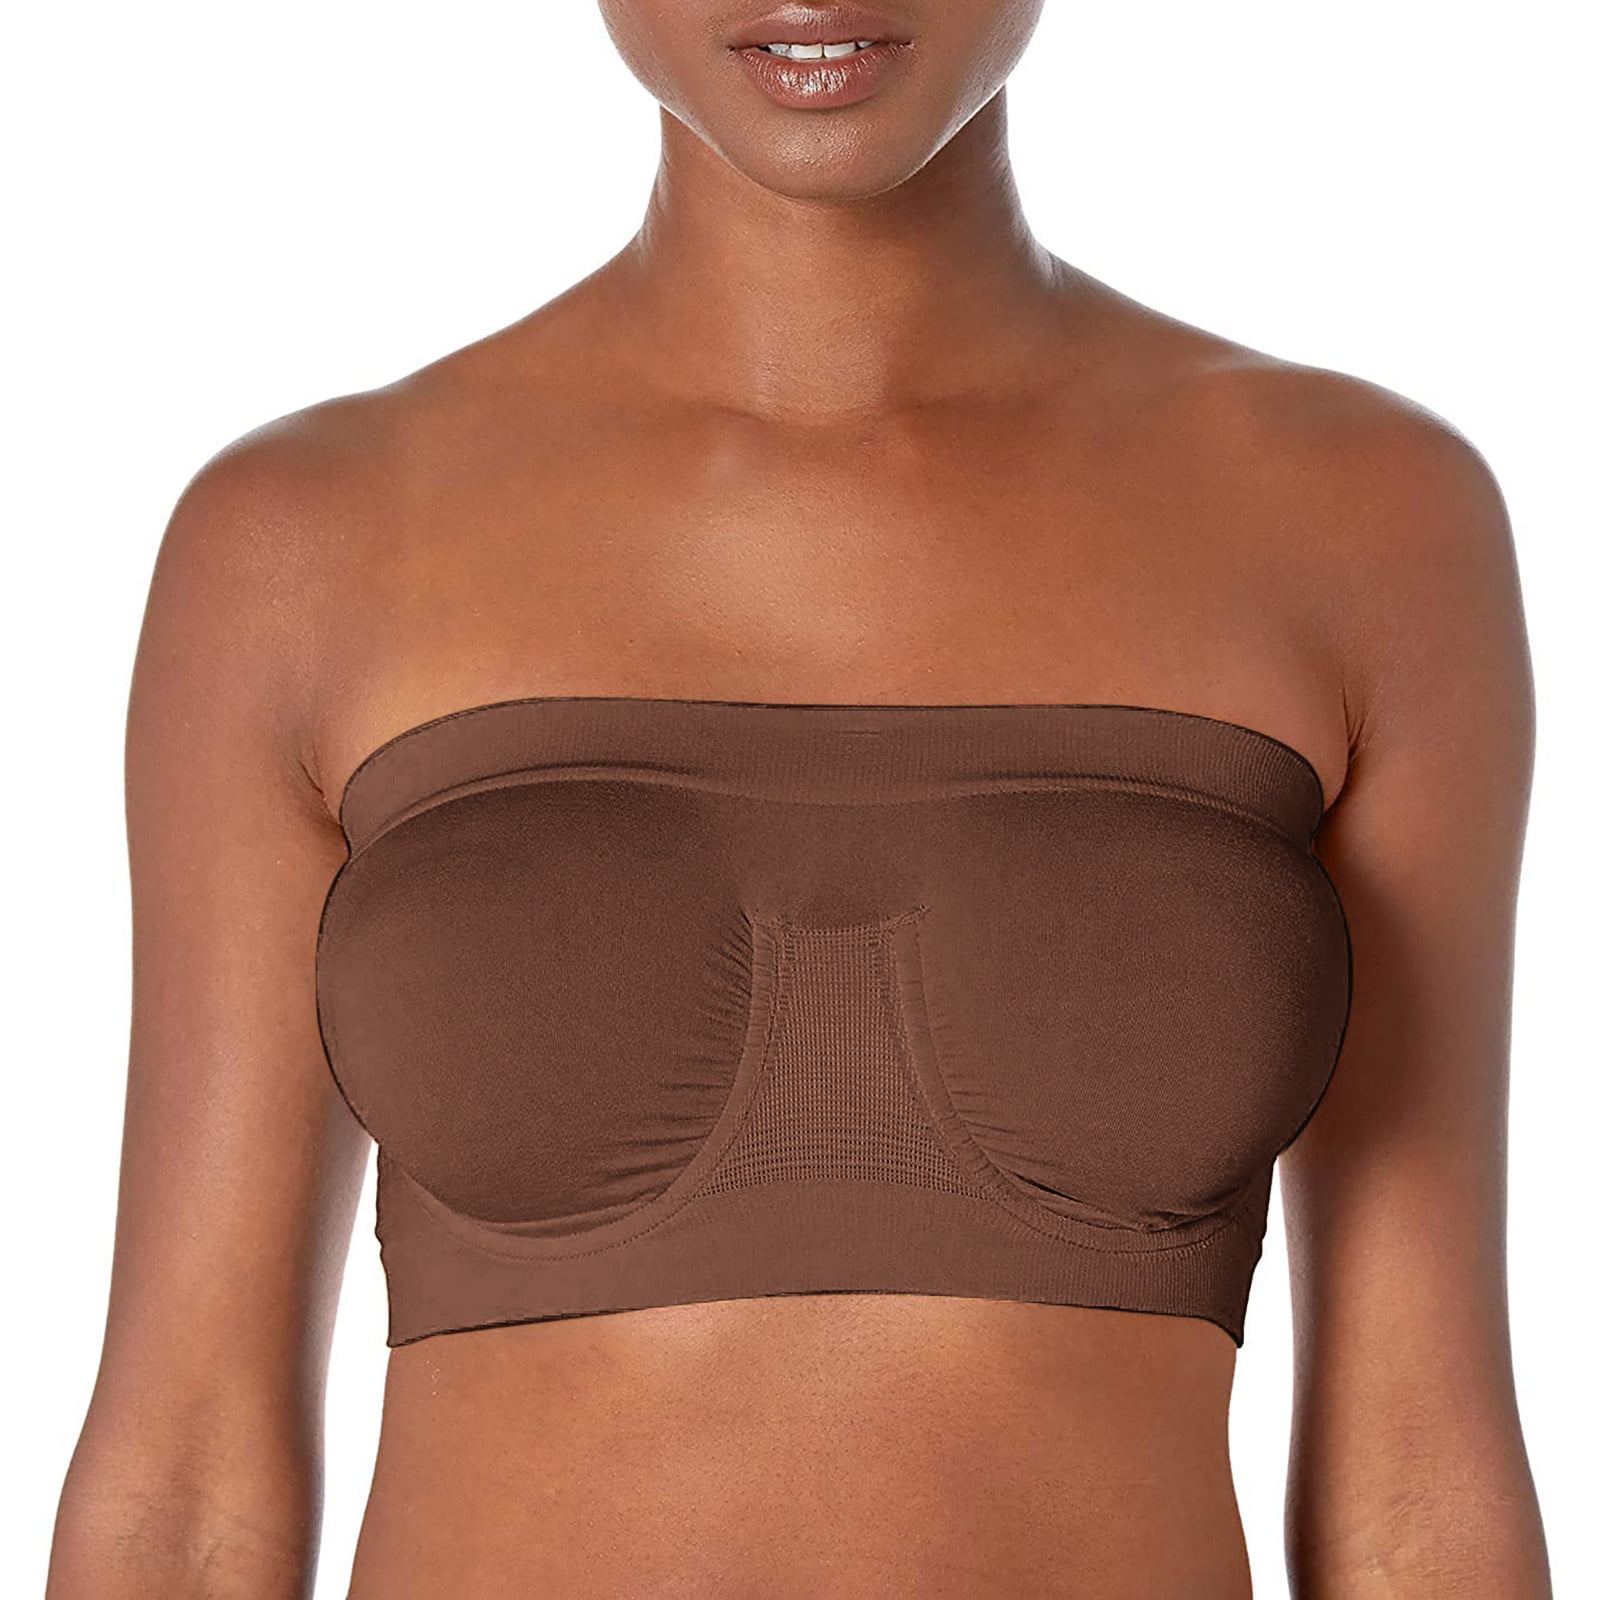 Exclare Women's Seamless Bandeau Unlined Underwire Minimizer Strapless Bra  for Large Bust(Beige,42DD) 